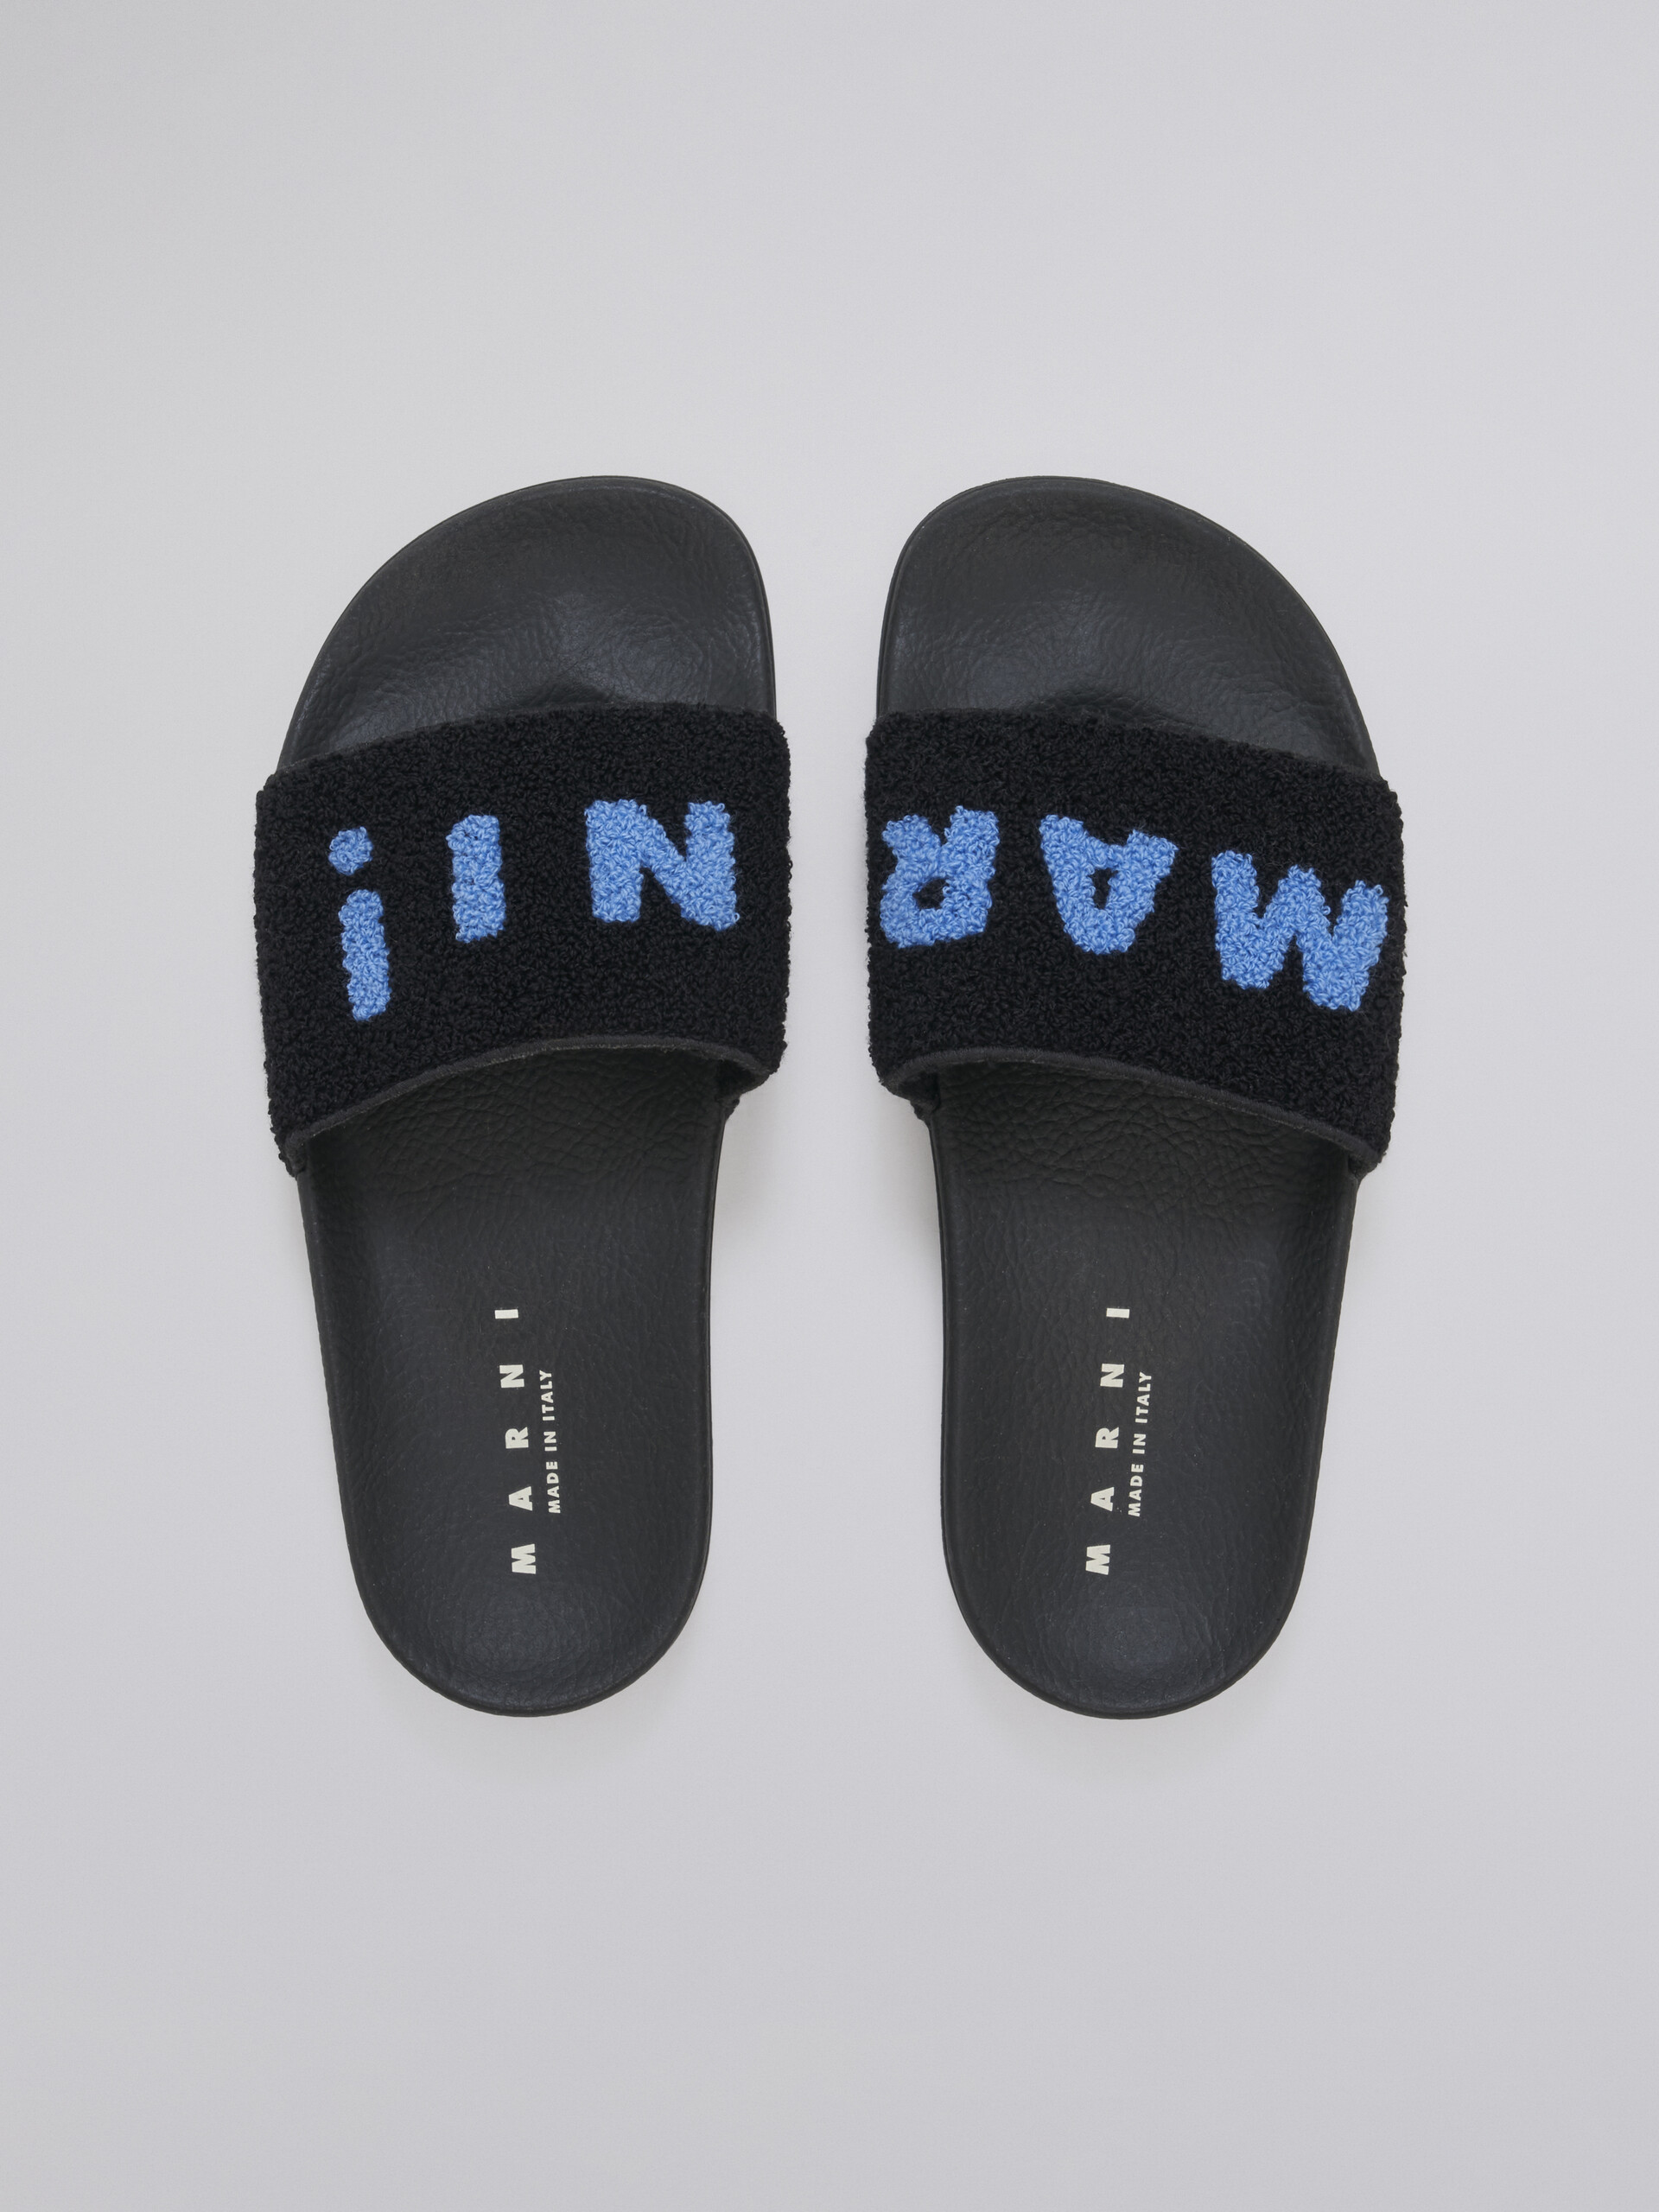 Rubber sandal with black and blue terry-cloth band - Sandals - Image 4